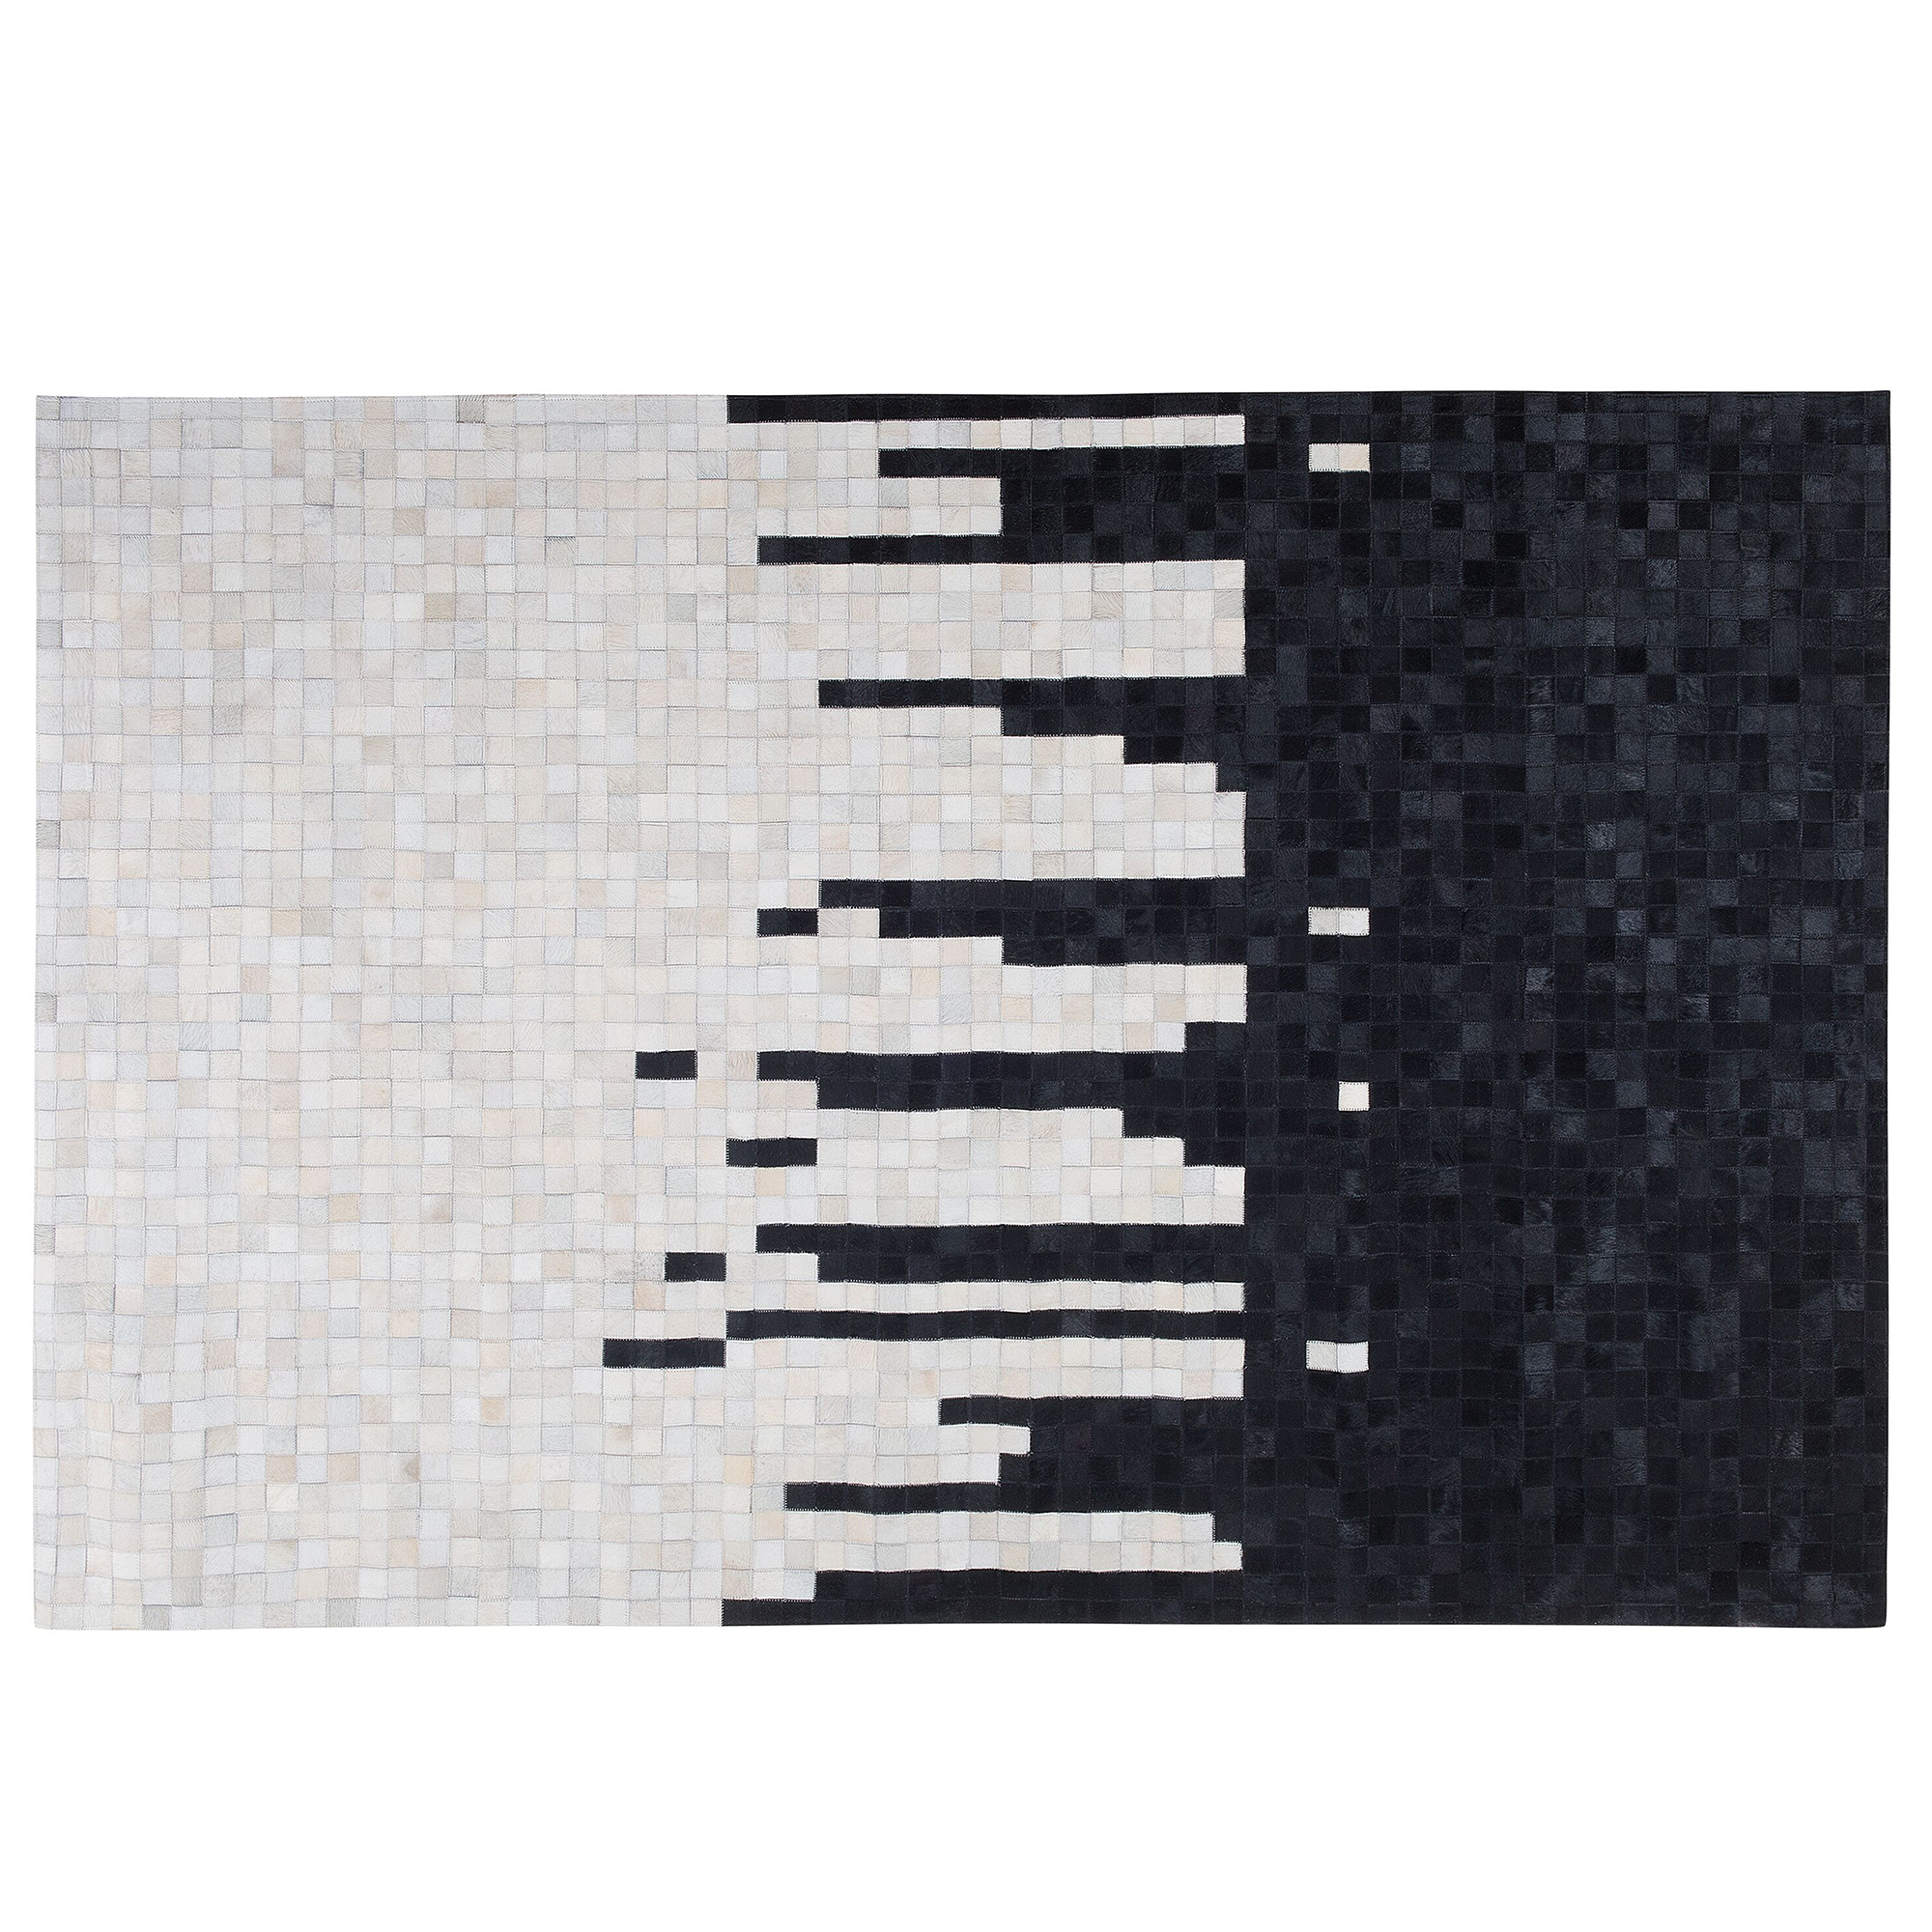 Beliani Area Rug Black and White Cowhide Leather 160 x 230 cm Rectangular Geometric Abstract Pattern Handcrafted